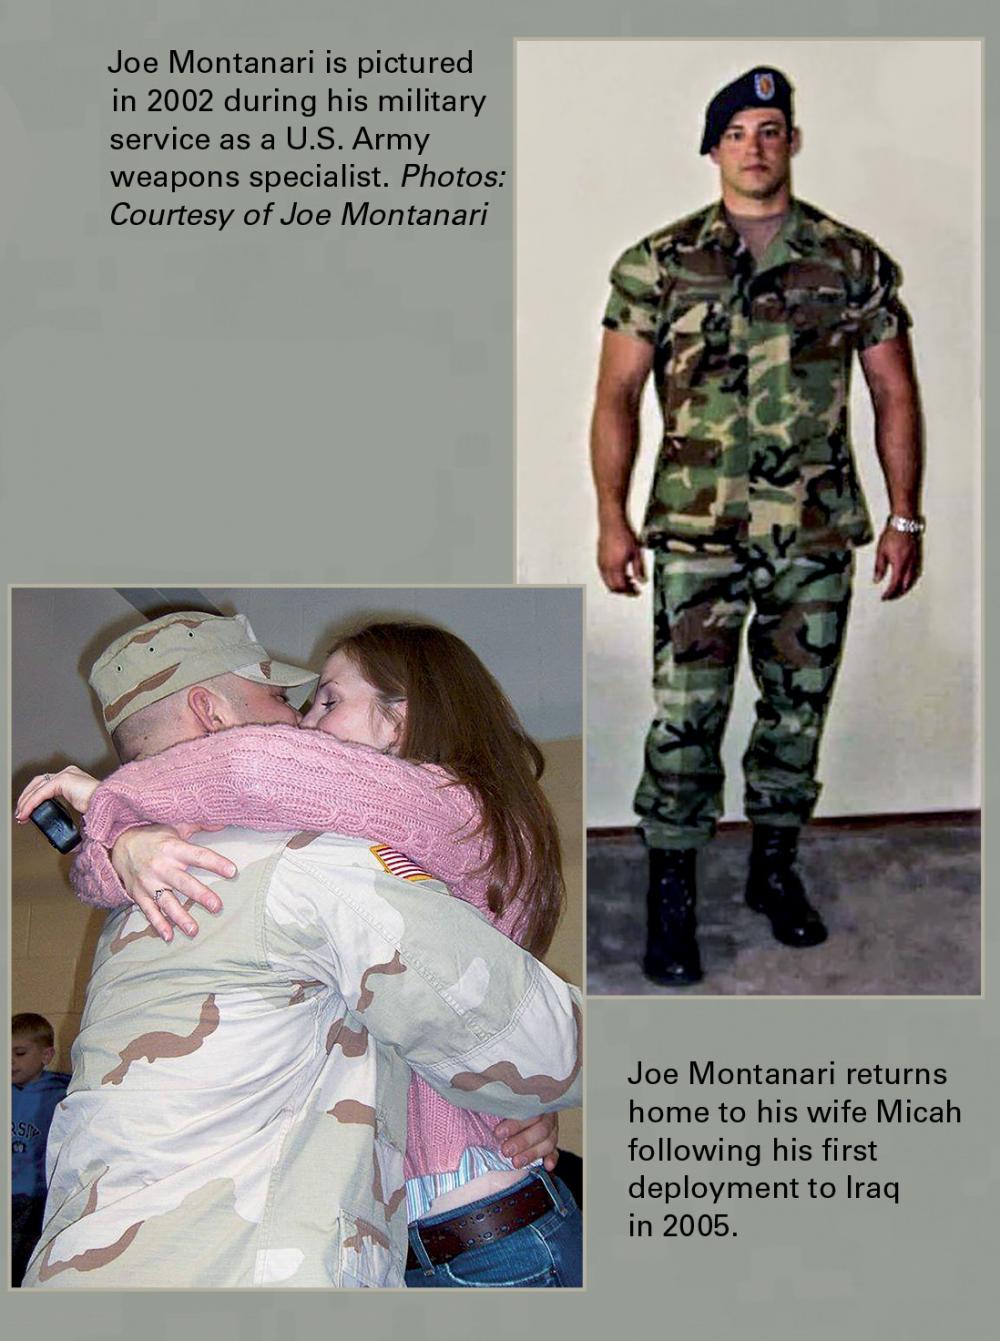 Joe in his Army uniform and Joe returning from deployment embracing a loved one